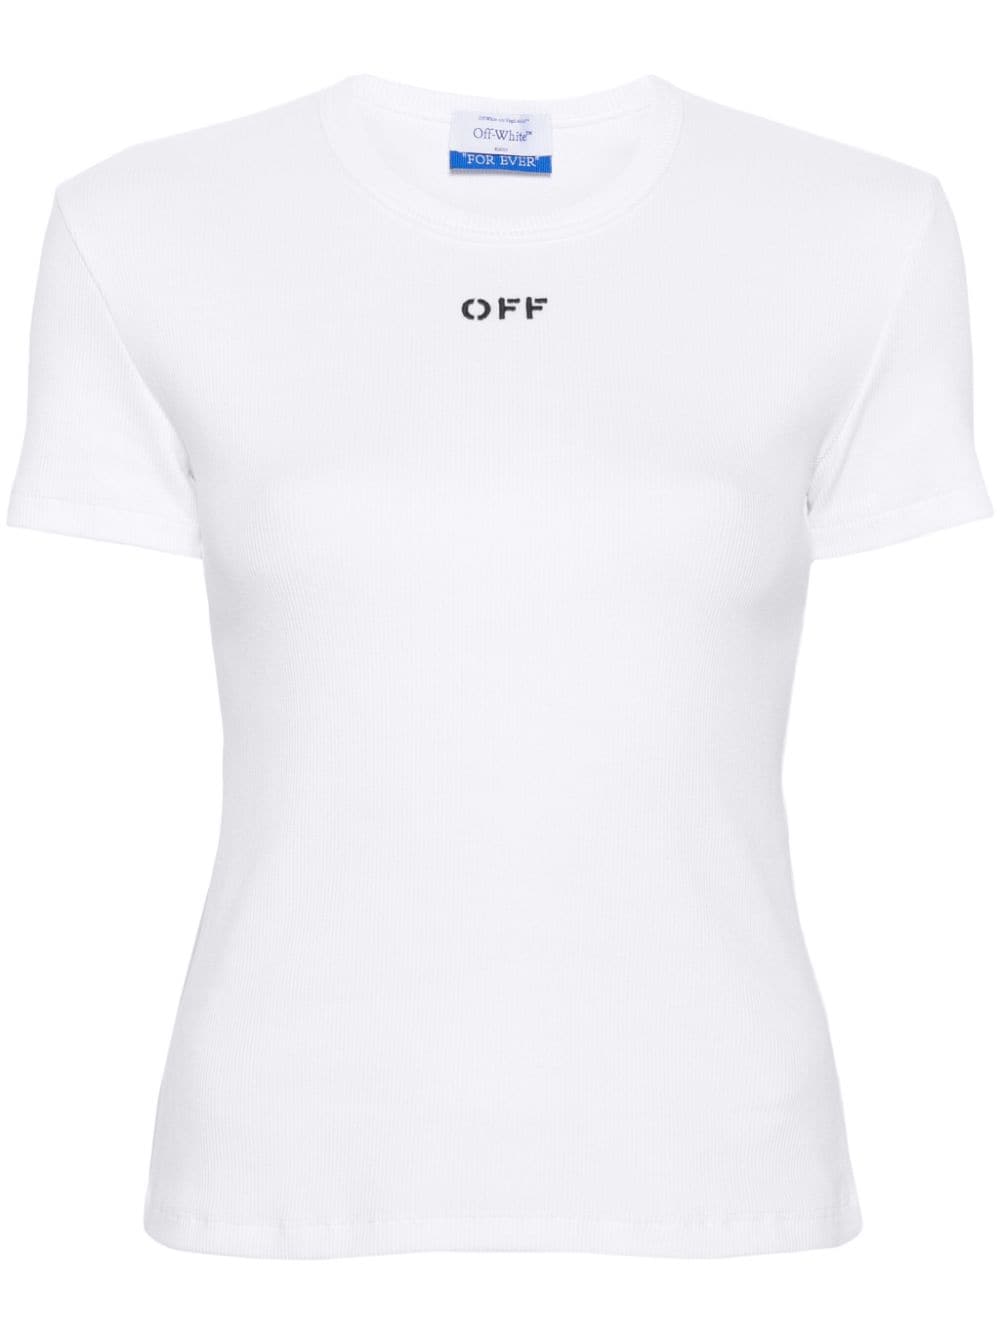 Off Stamp stretch-cotton T-shirt<BR/><BR/><BR/>